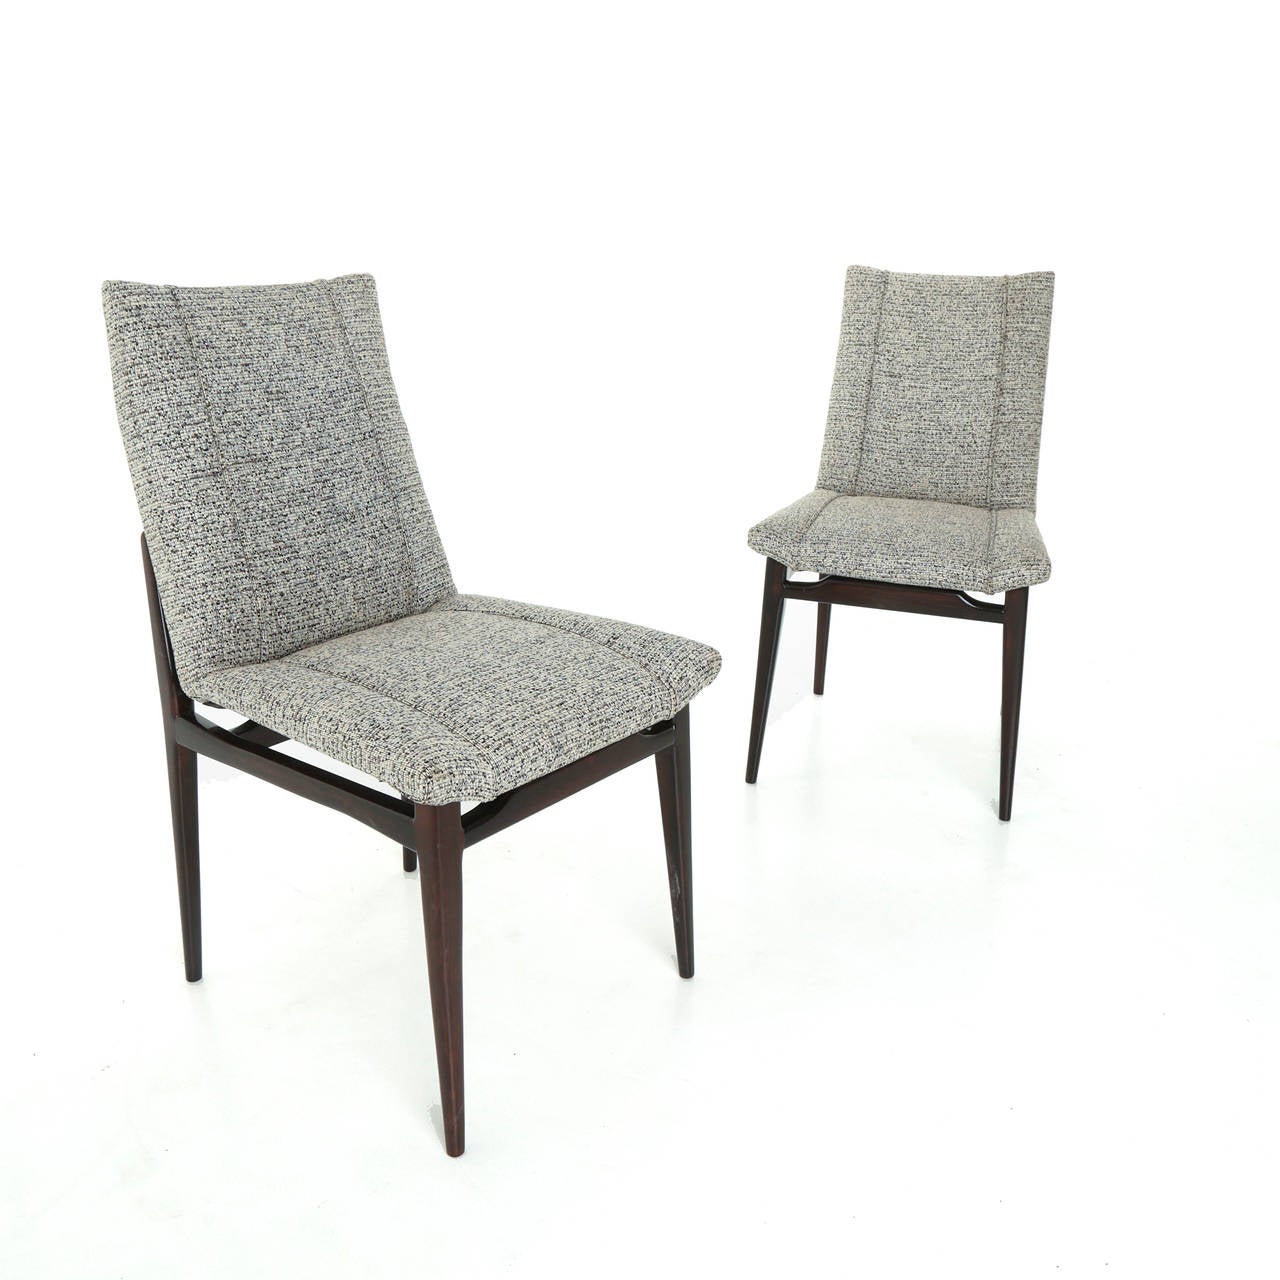 Pair of sculptural wood armchairs from Brazil with gray fabric upholstery and vertical piping details.

Seat depth: 16 inches.

Many pieces are stored in our warehouse, so please click on 